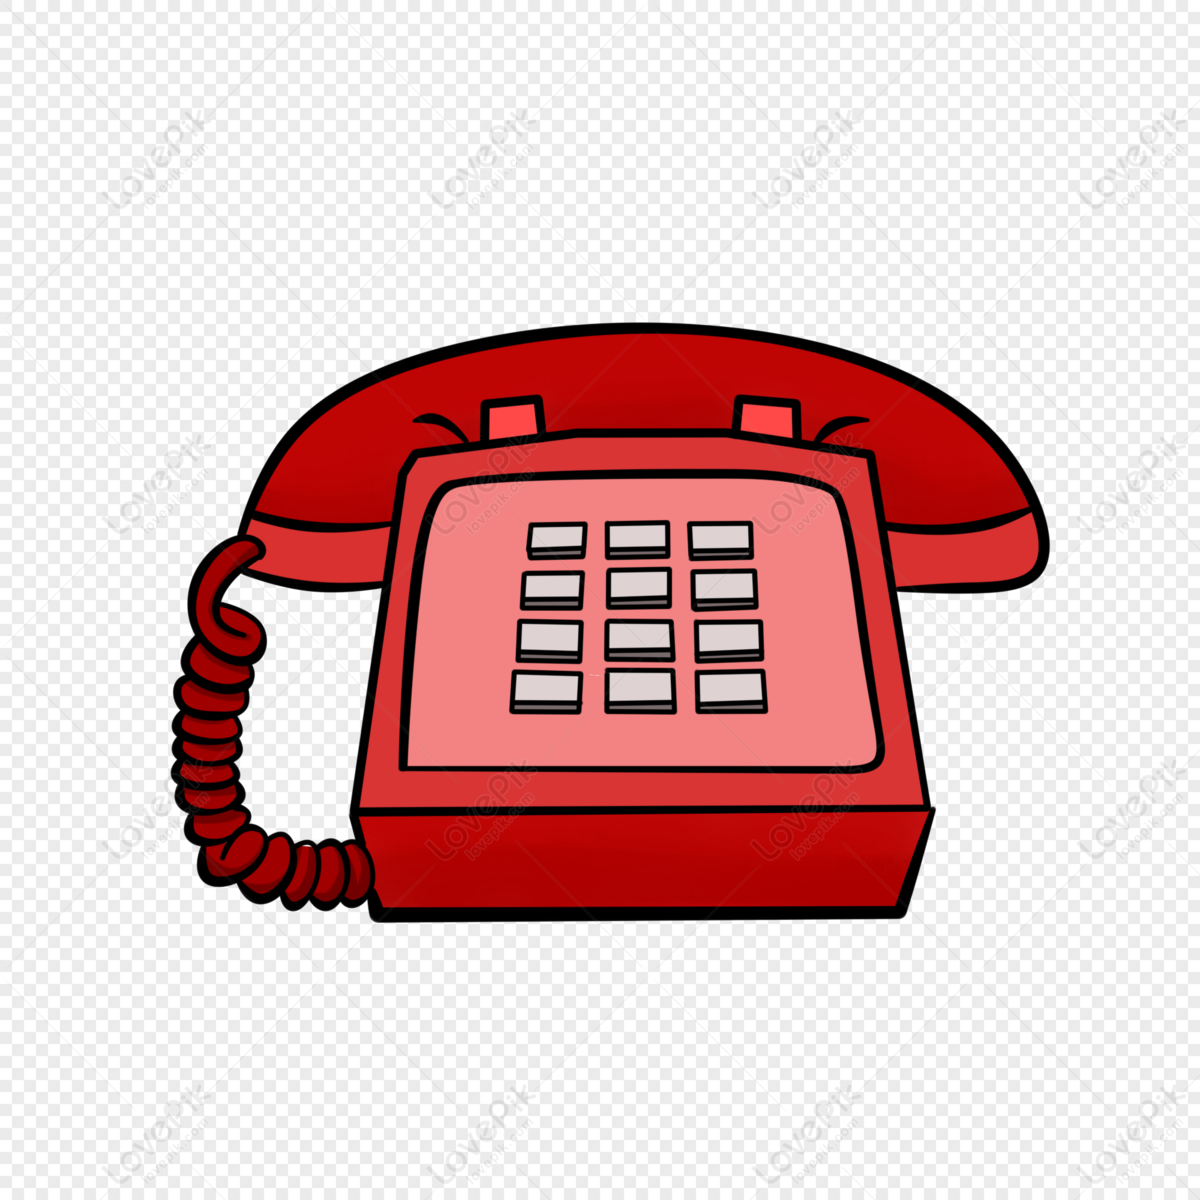 Telephone Cartoon Hand Painted Red Phone PNG Image And Clipart Image For  Free Download - Lovepik | 401009848